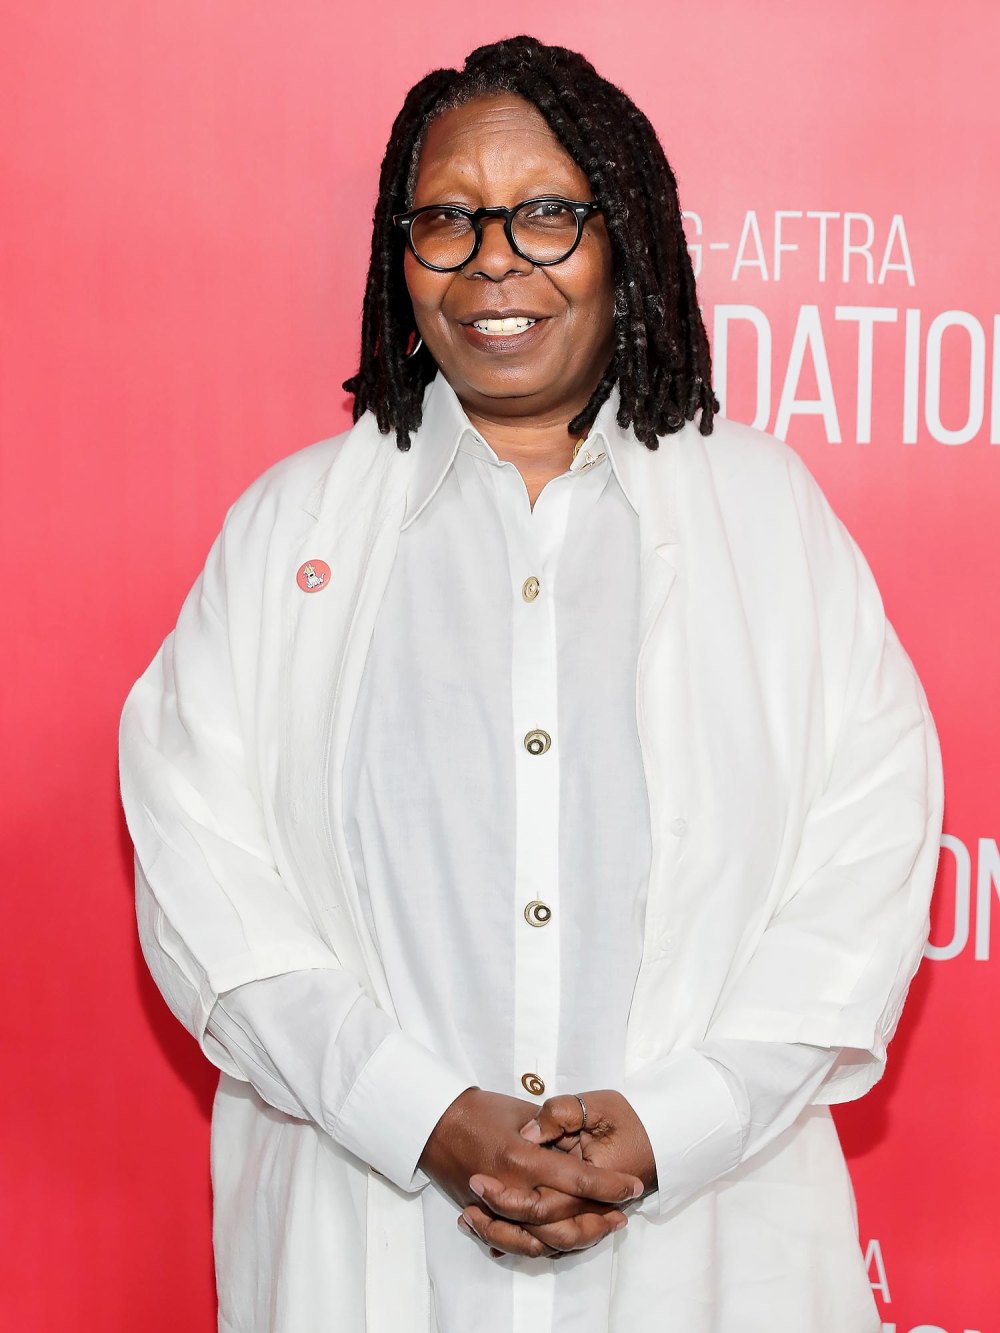 Whoopi Goldberg Confesses to Relationship with Billionaire 40 Years Older than Her